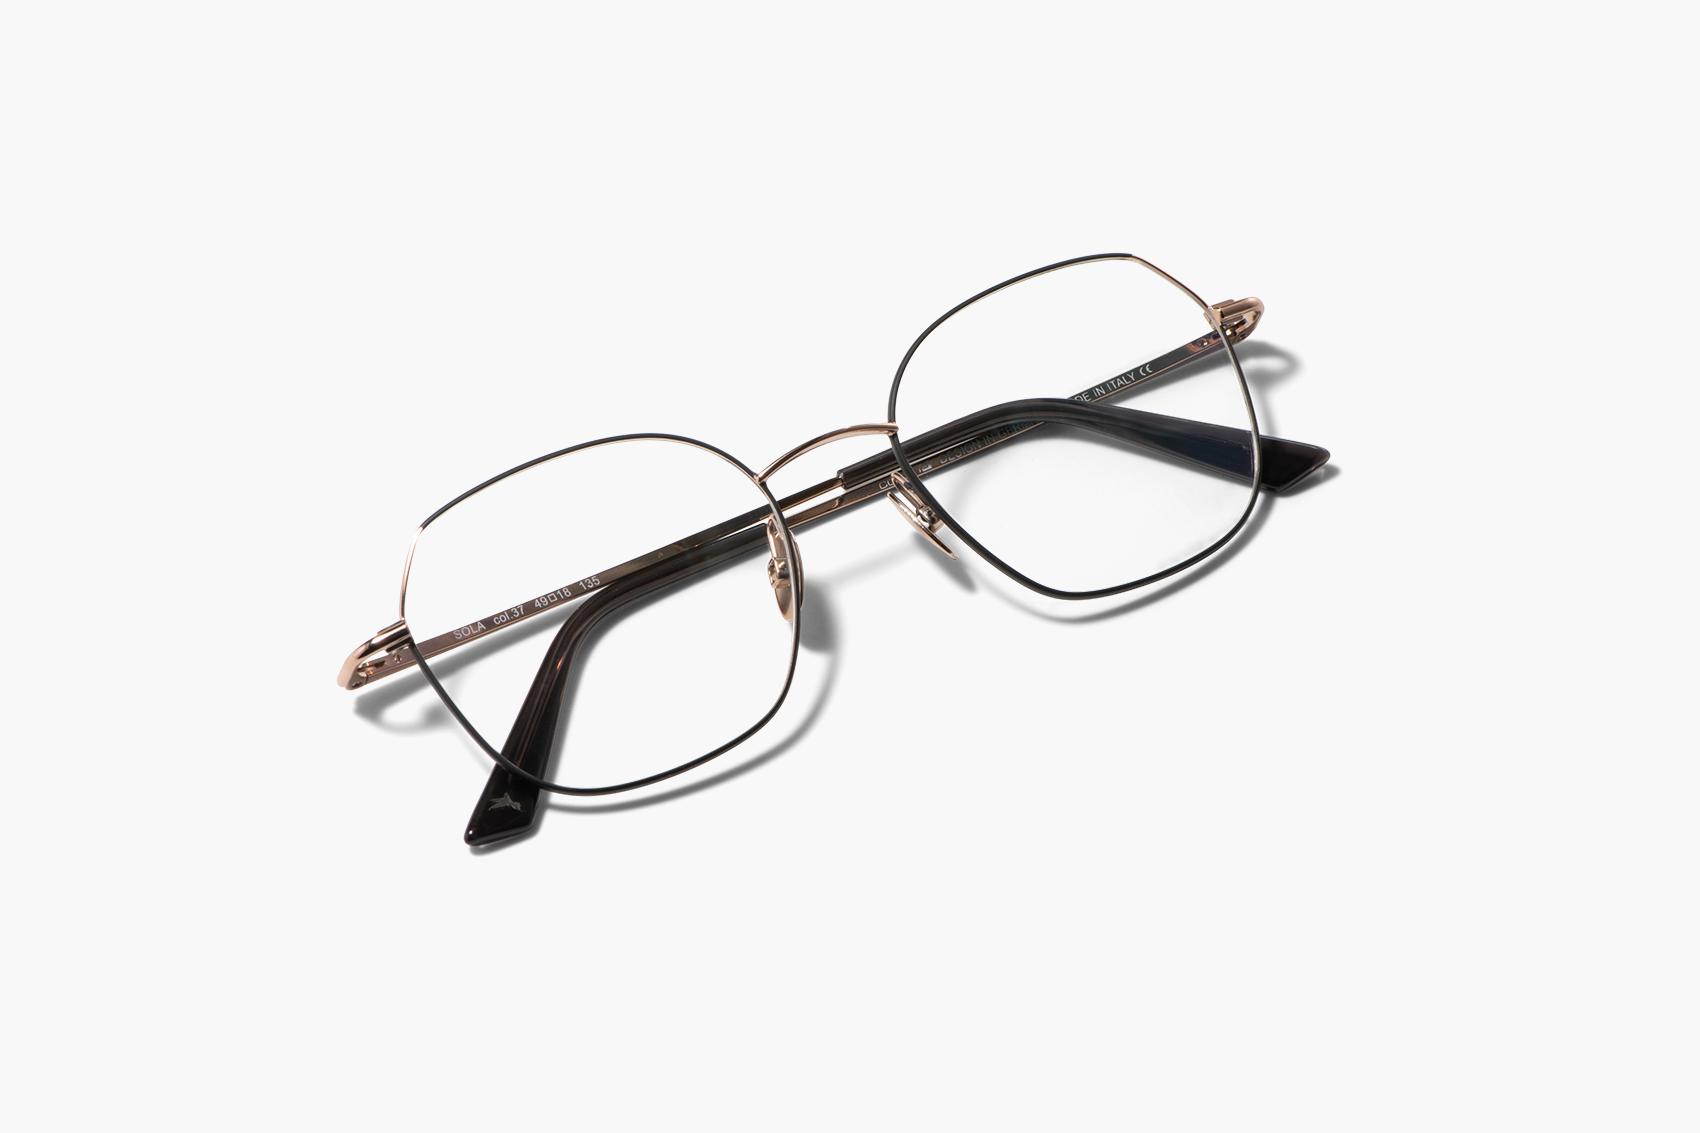 https://www.favrspecs.com/cdn-cgi/image/width=1920,quality=75,format=auto,fit=scale-down,background=%23F8F8F8/media/product-variants/6969/1iHFbUsXDoPpLhat/eyeglasses-colibris-rosegold-black-top.png